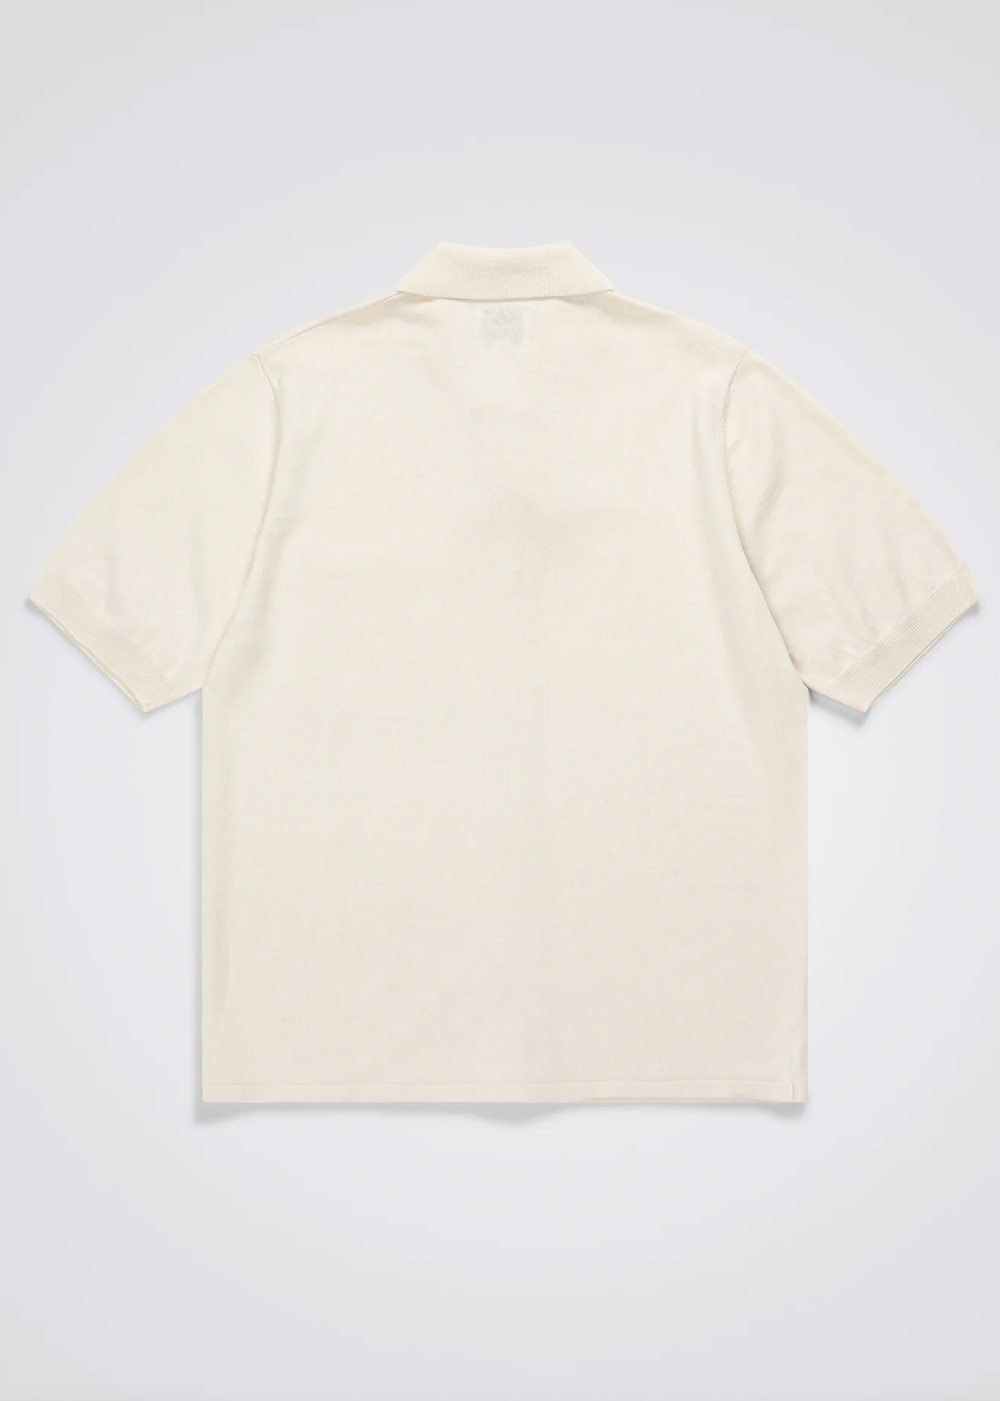 Rollo Cotton Linen Short Sleeve Shirt - Kit White - Norse Projects Canada - Danali - N45-0572